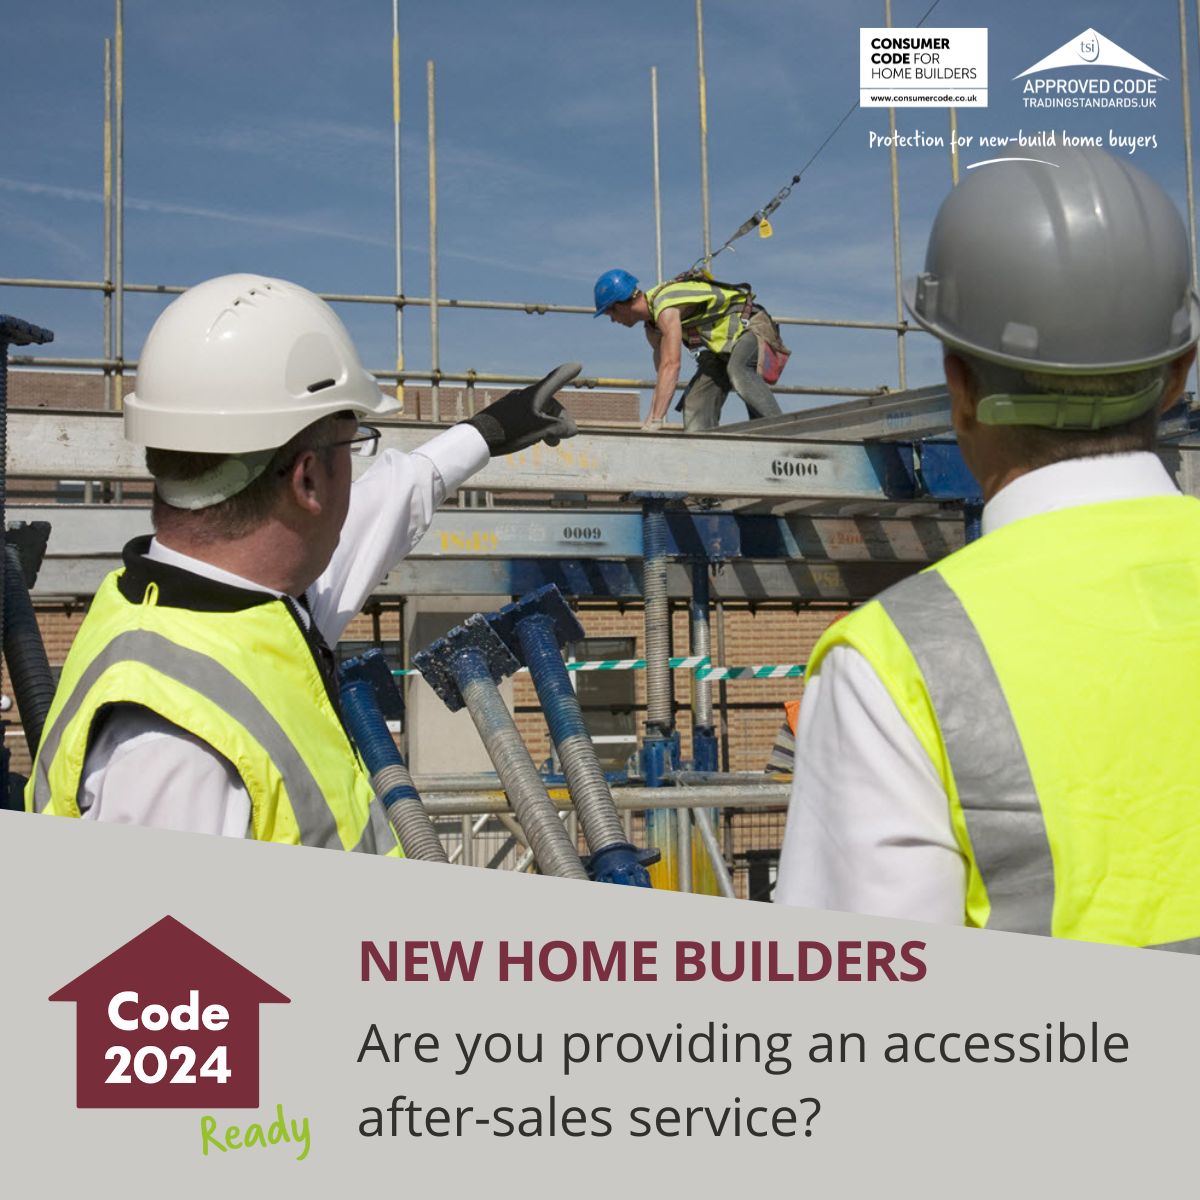 Home builders – does your after-sales service meet the Code requirements? Our video gives you some useful and practical tips to ensure you have everything covered buff.ly/3SPqo1s @homebuildersfed @fmbuilders @nfbuilders